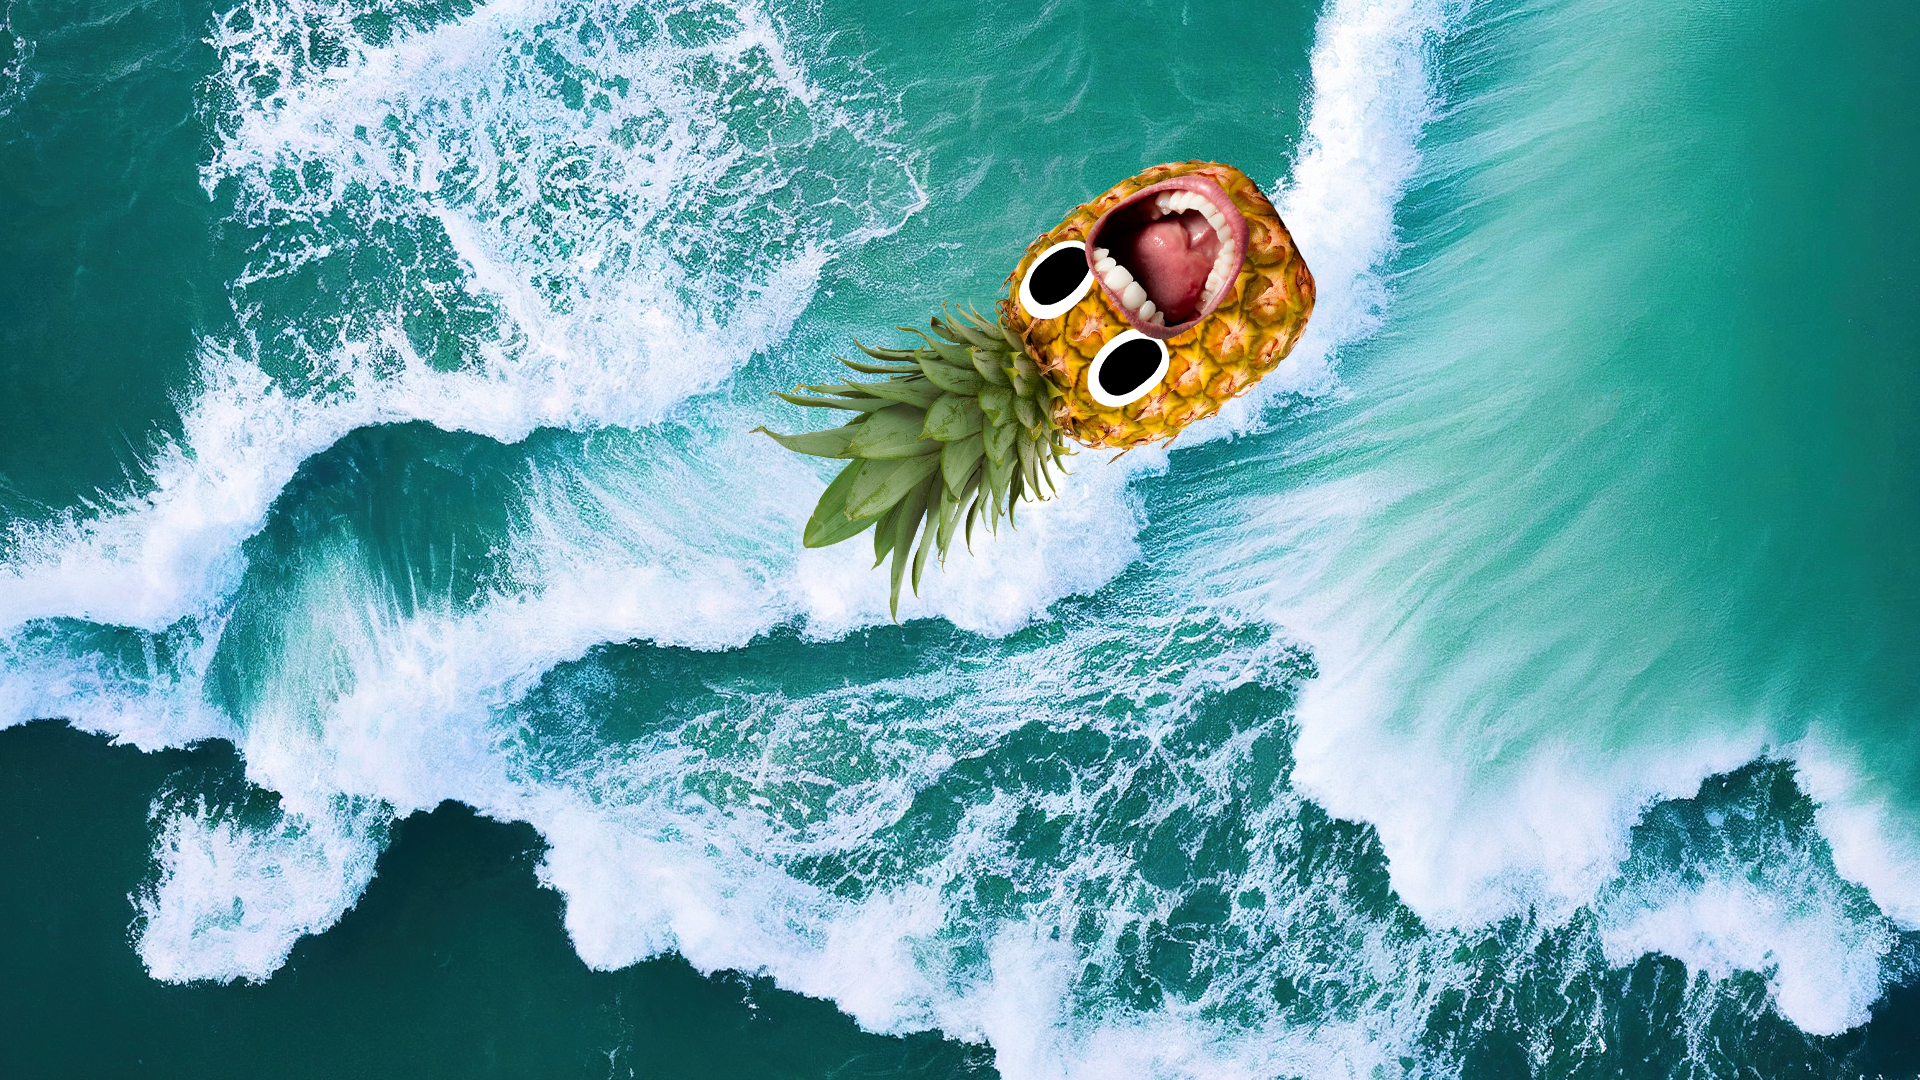 Pineapple in the waves